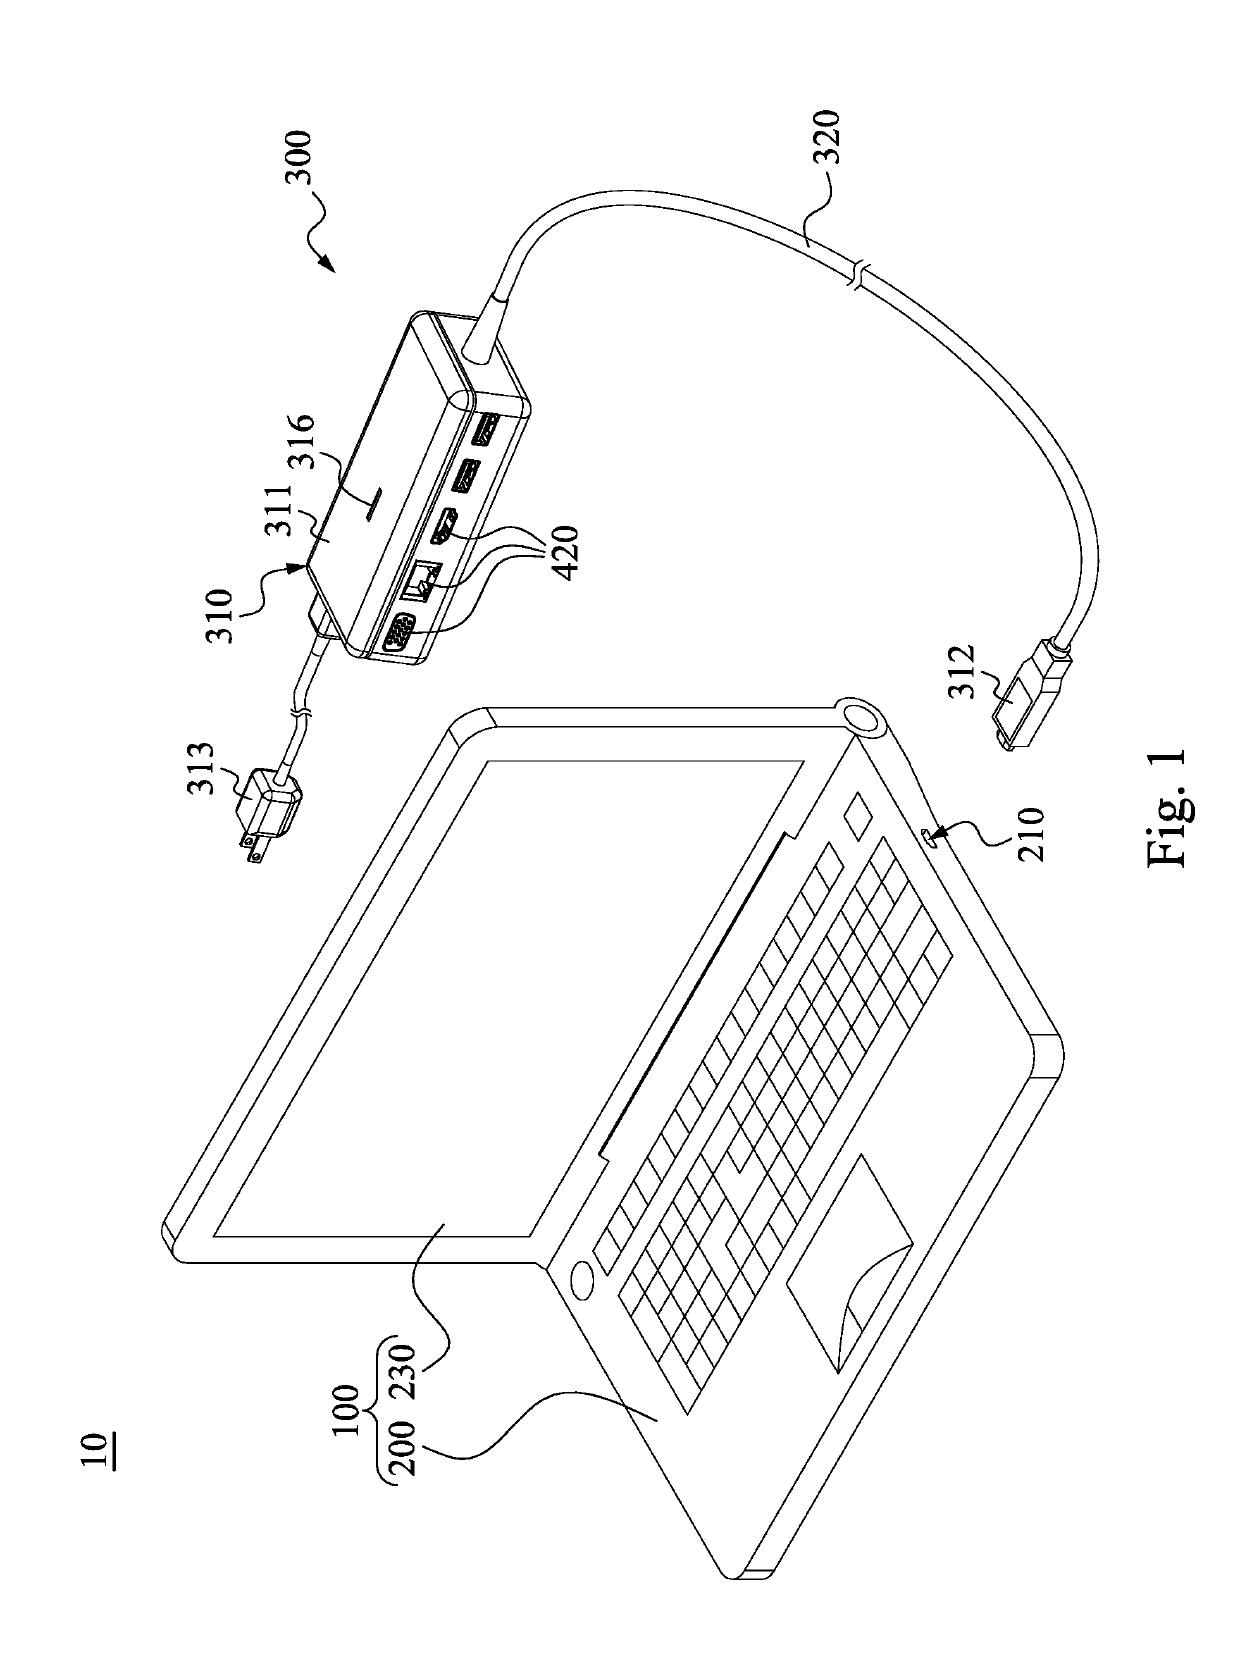 Computer System And Its Power Adapter Having Input / Output Connection Interfaces